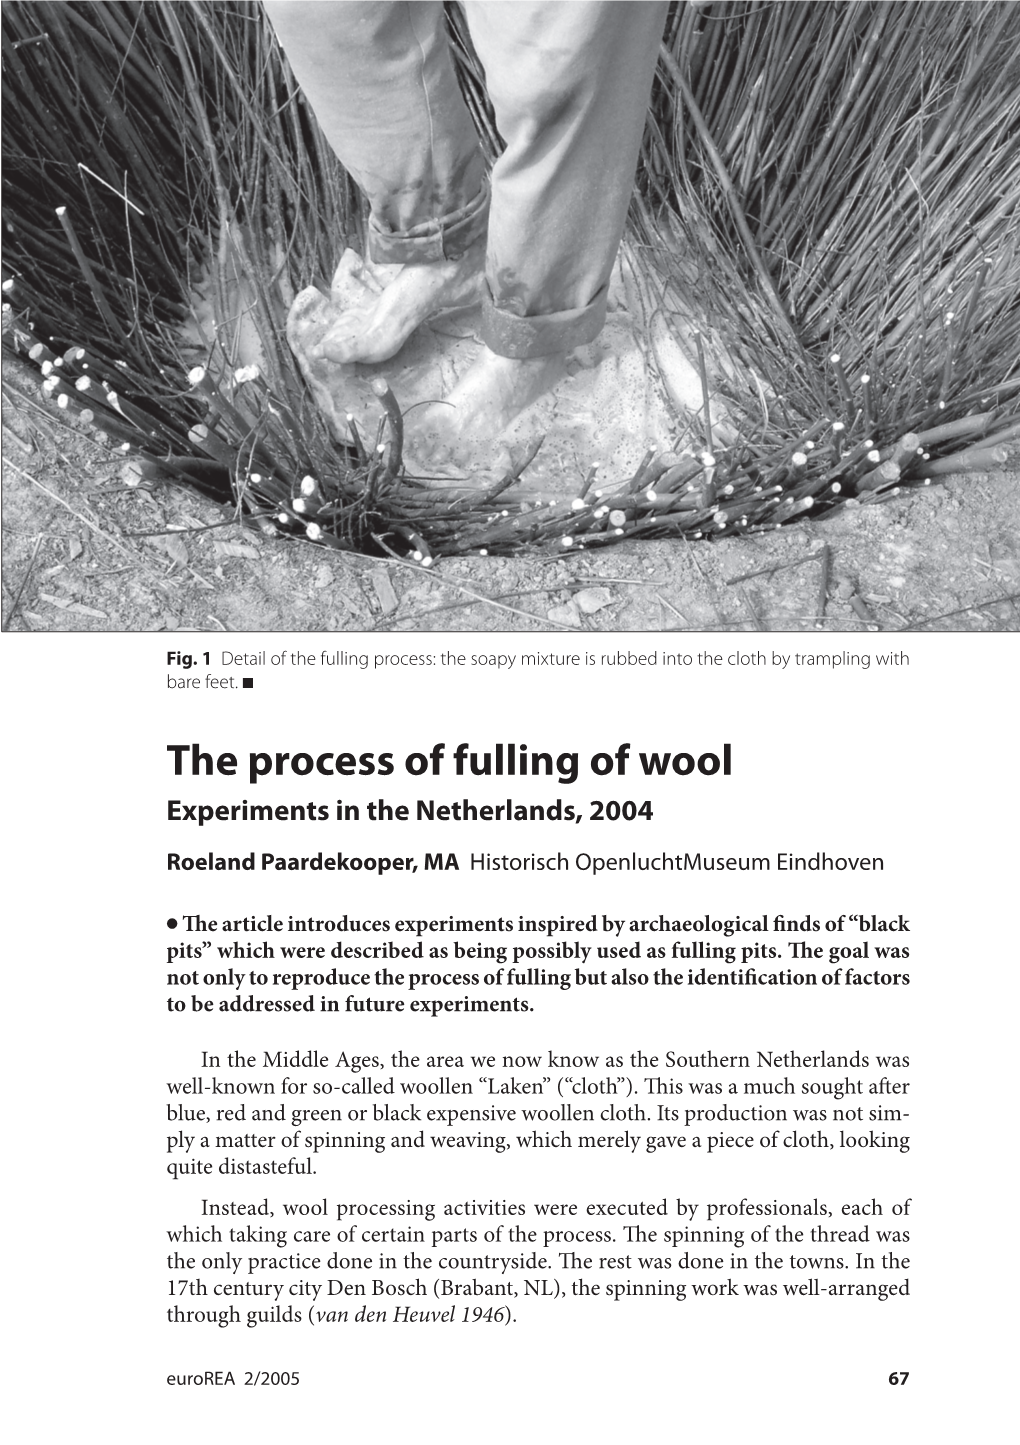 The Process of Fulling of Wool